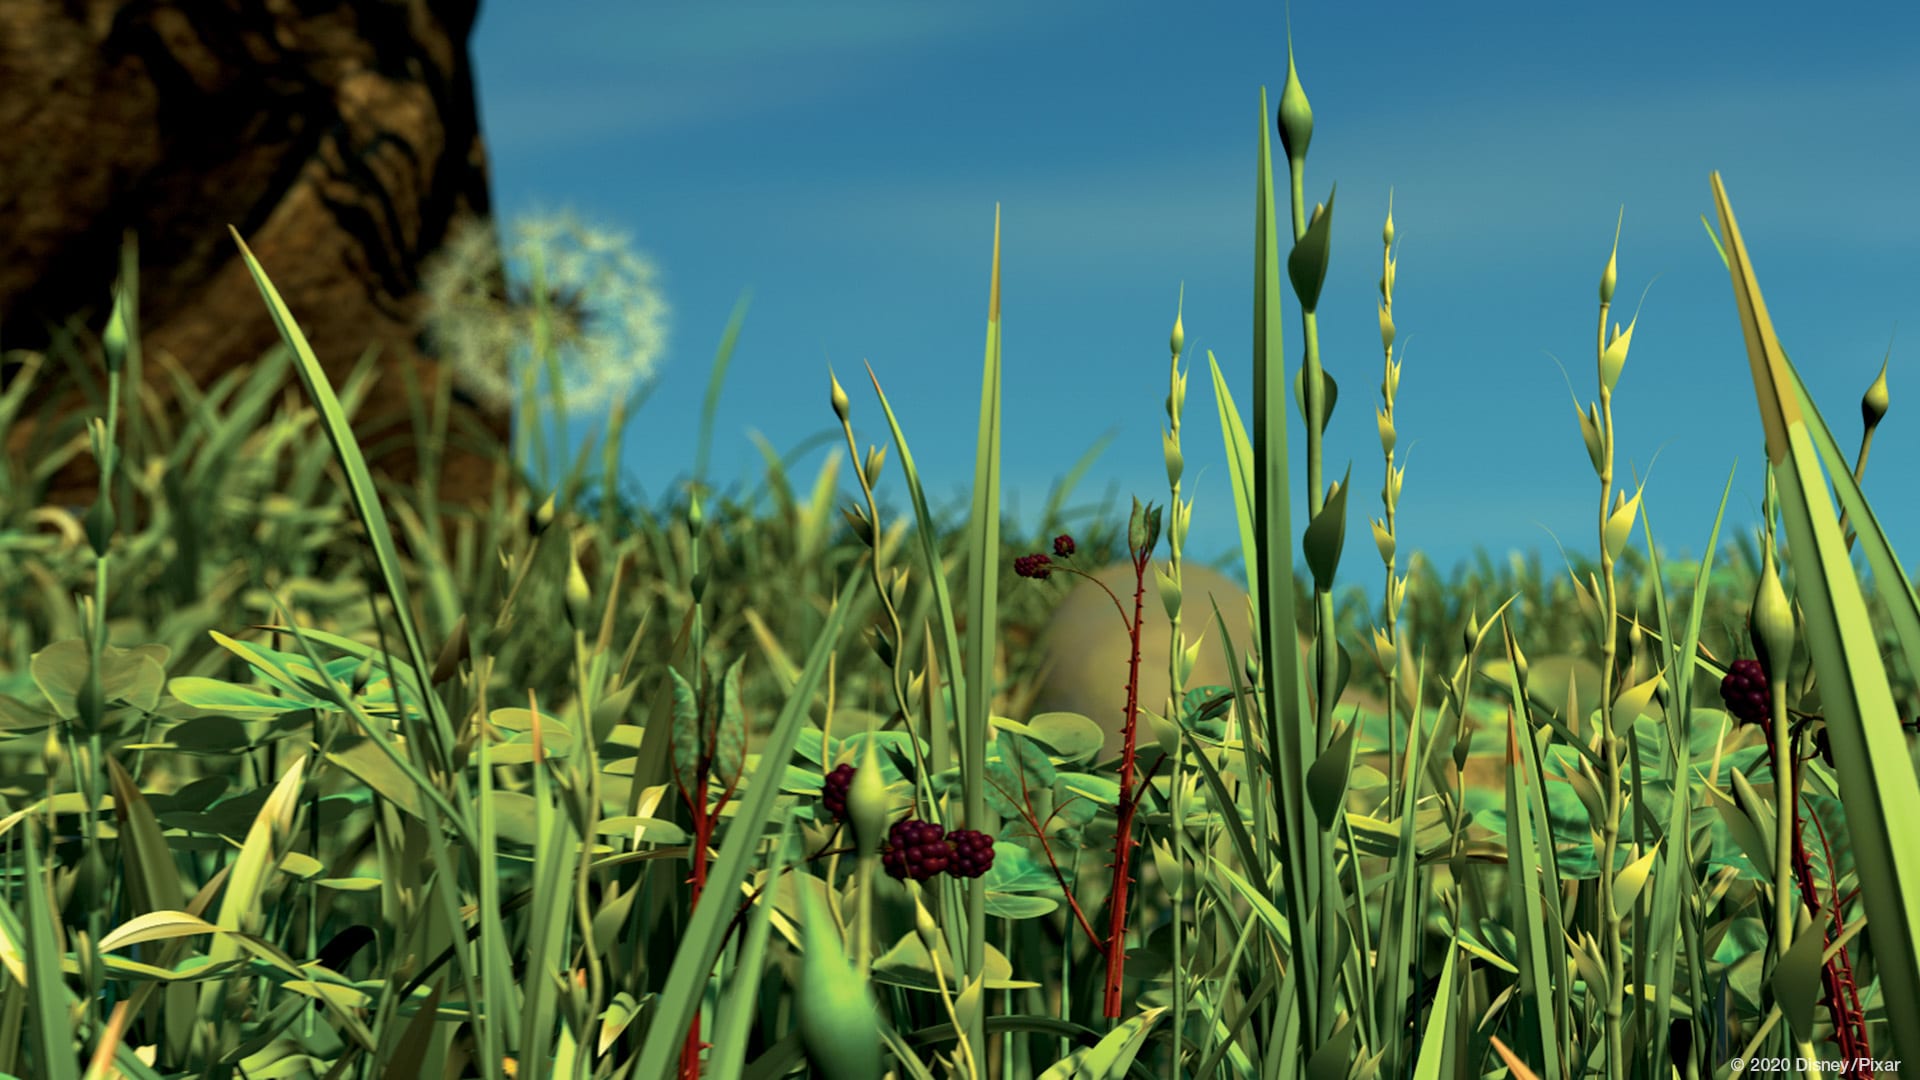 A Bugs Life - Garden view for an insect in Disney Pixar movie A Bugs Life